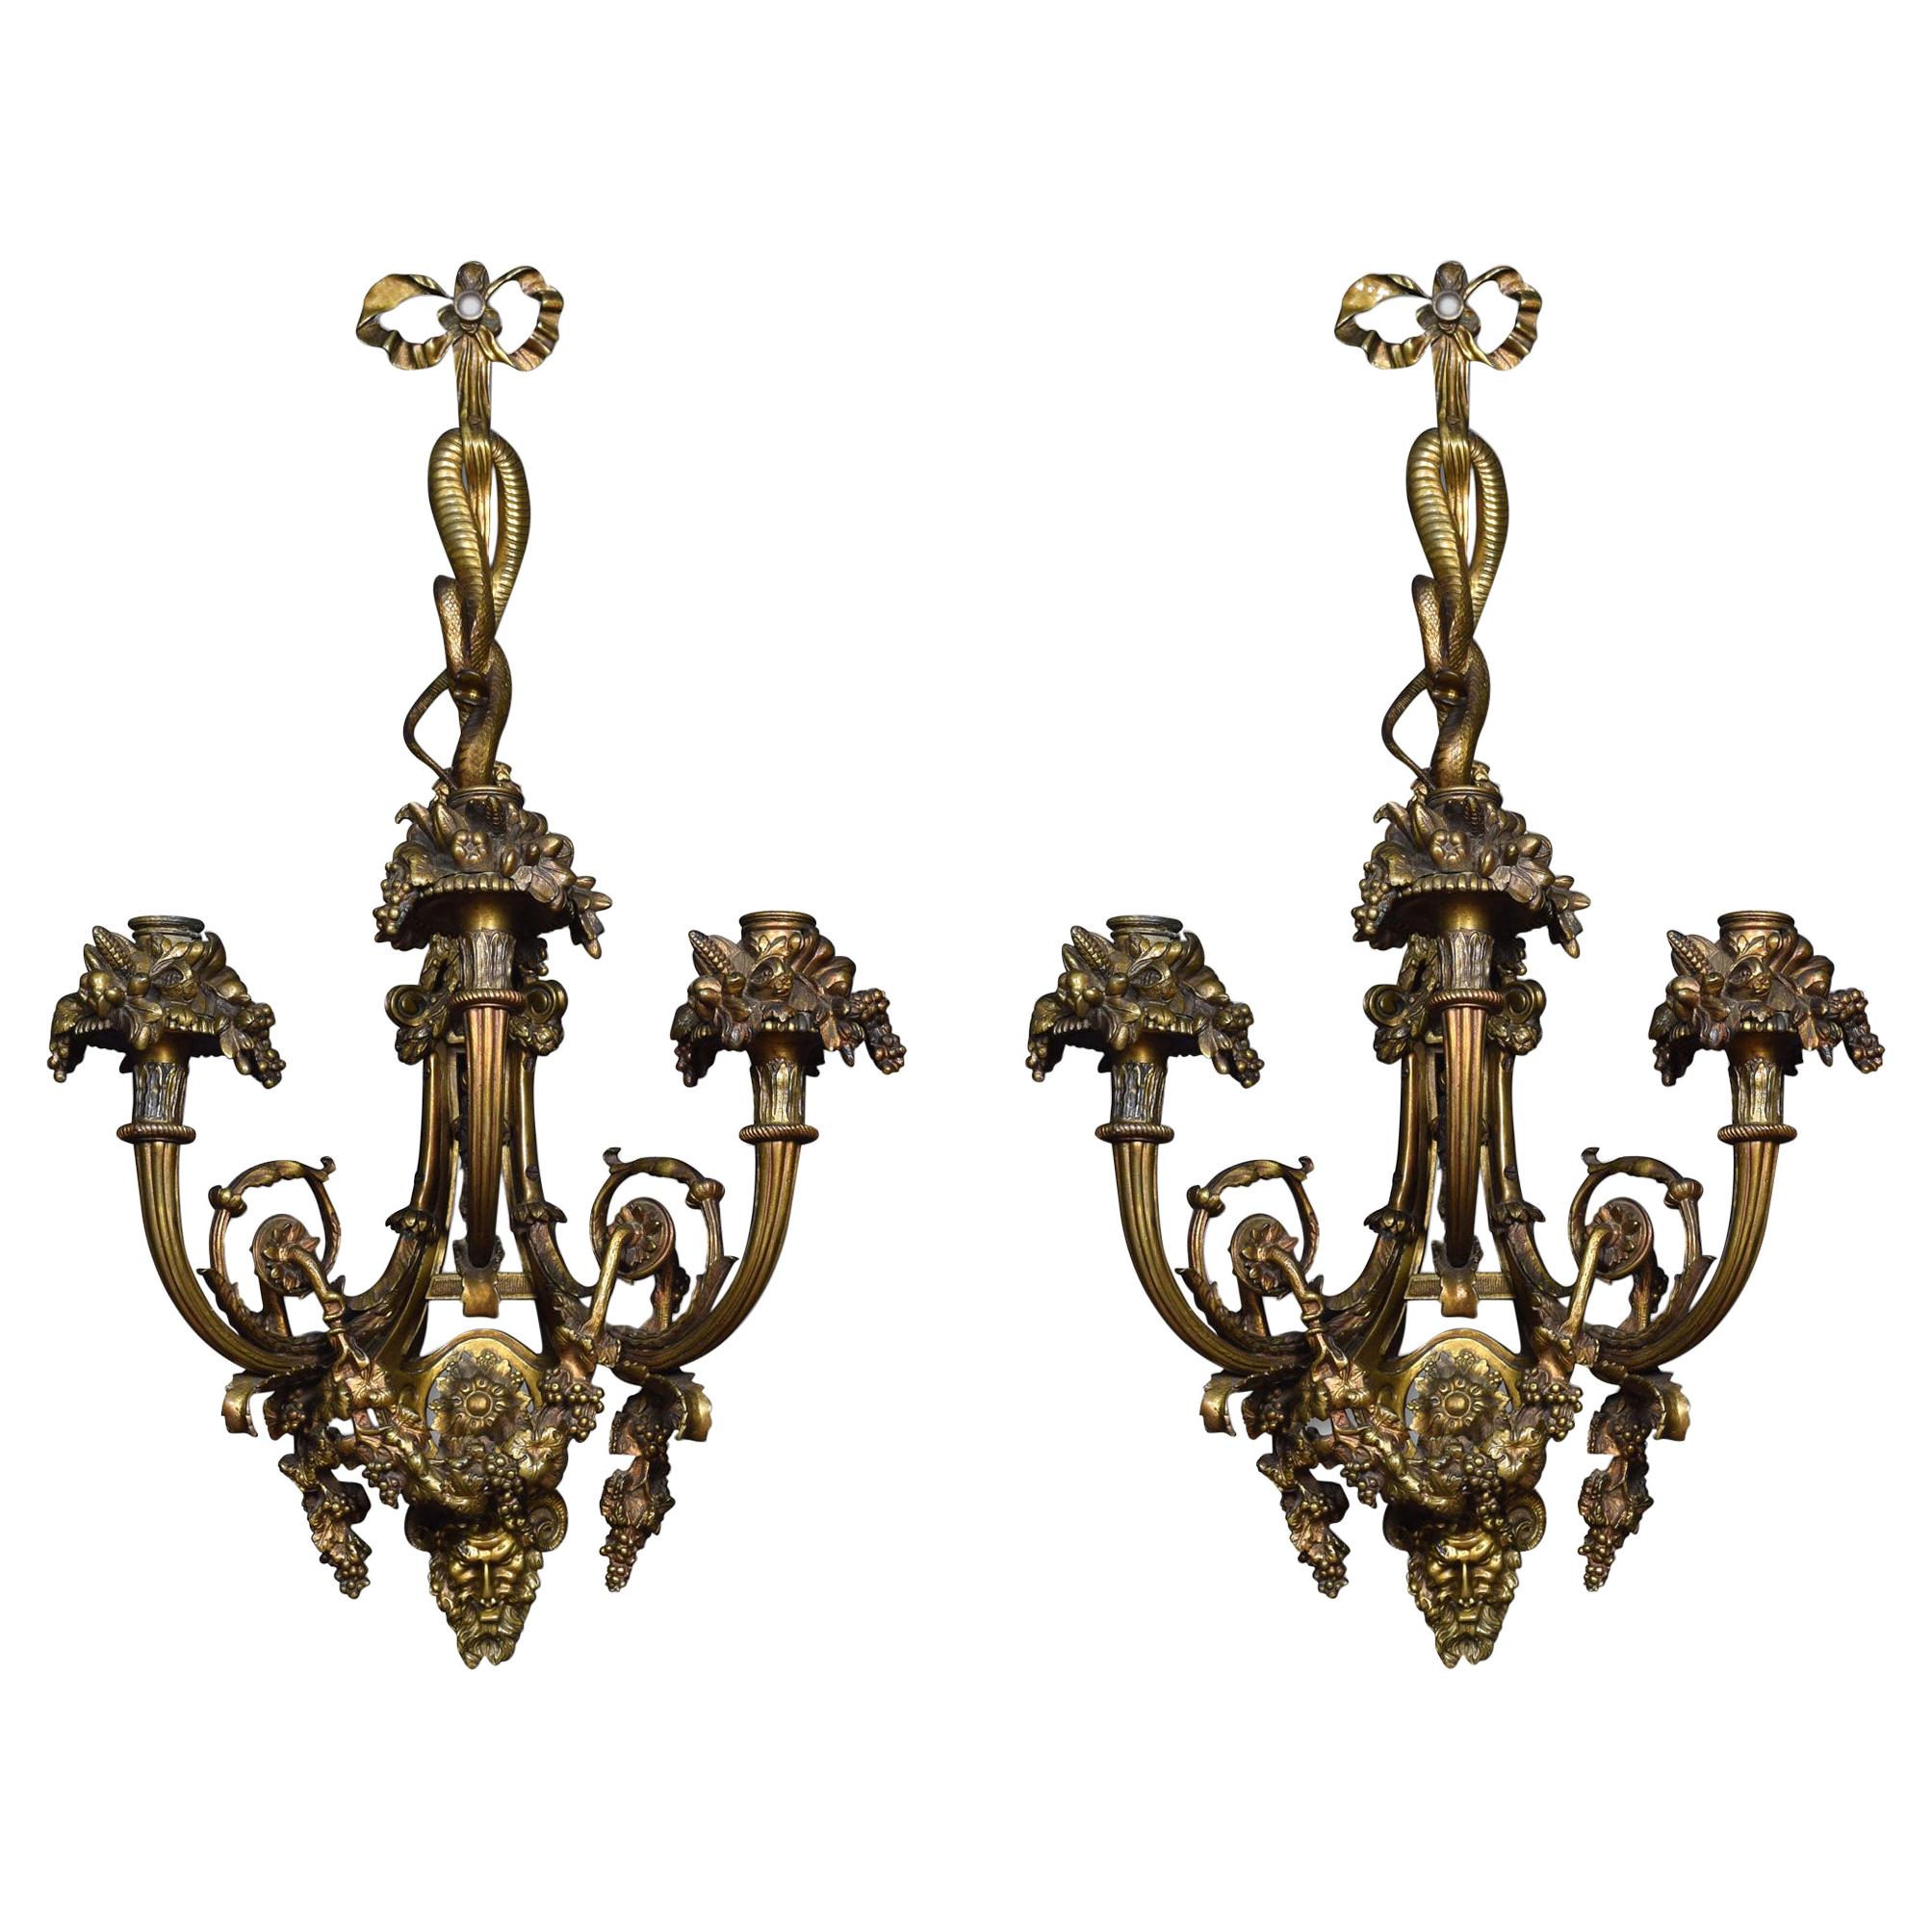 Pair of Important French Louis XIV Style Gilt Bronze Three Arm Wall Sconces For Sale